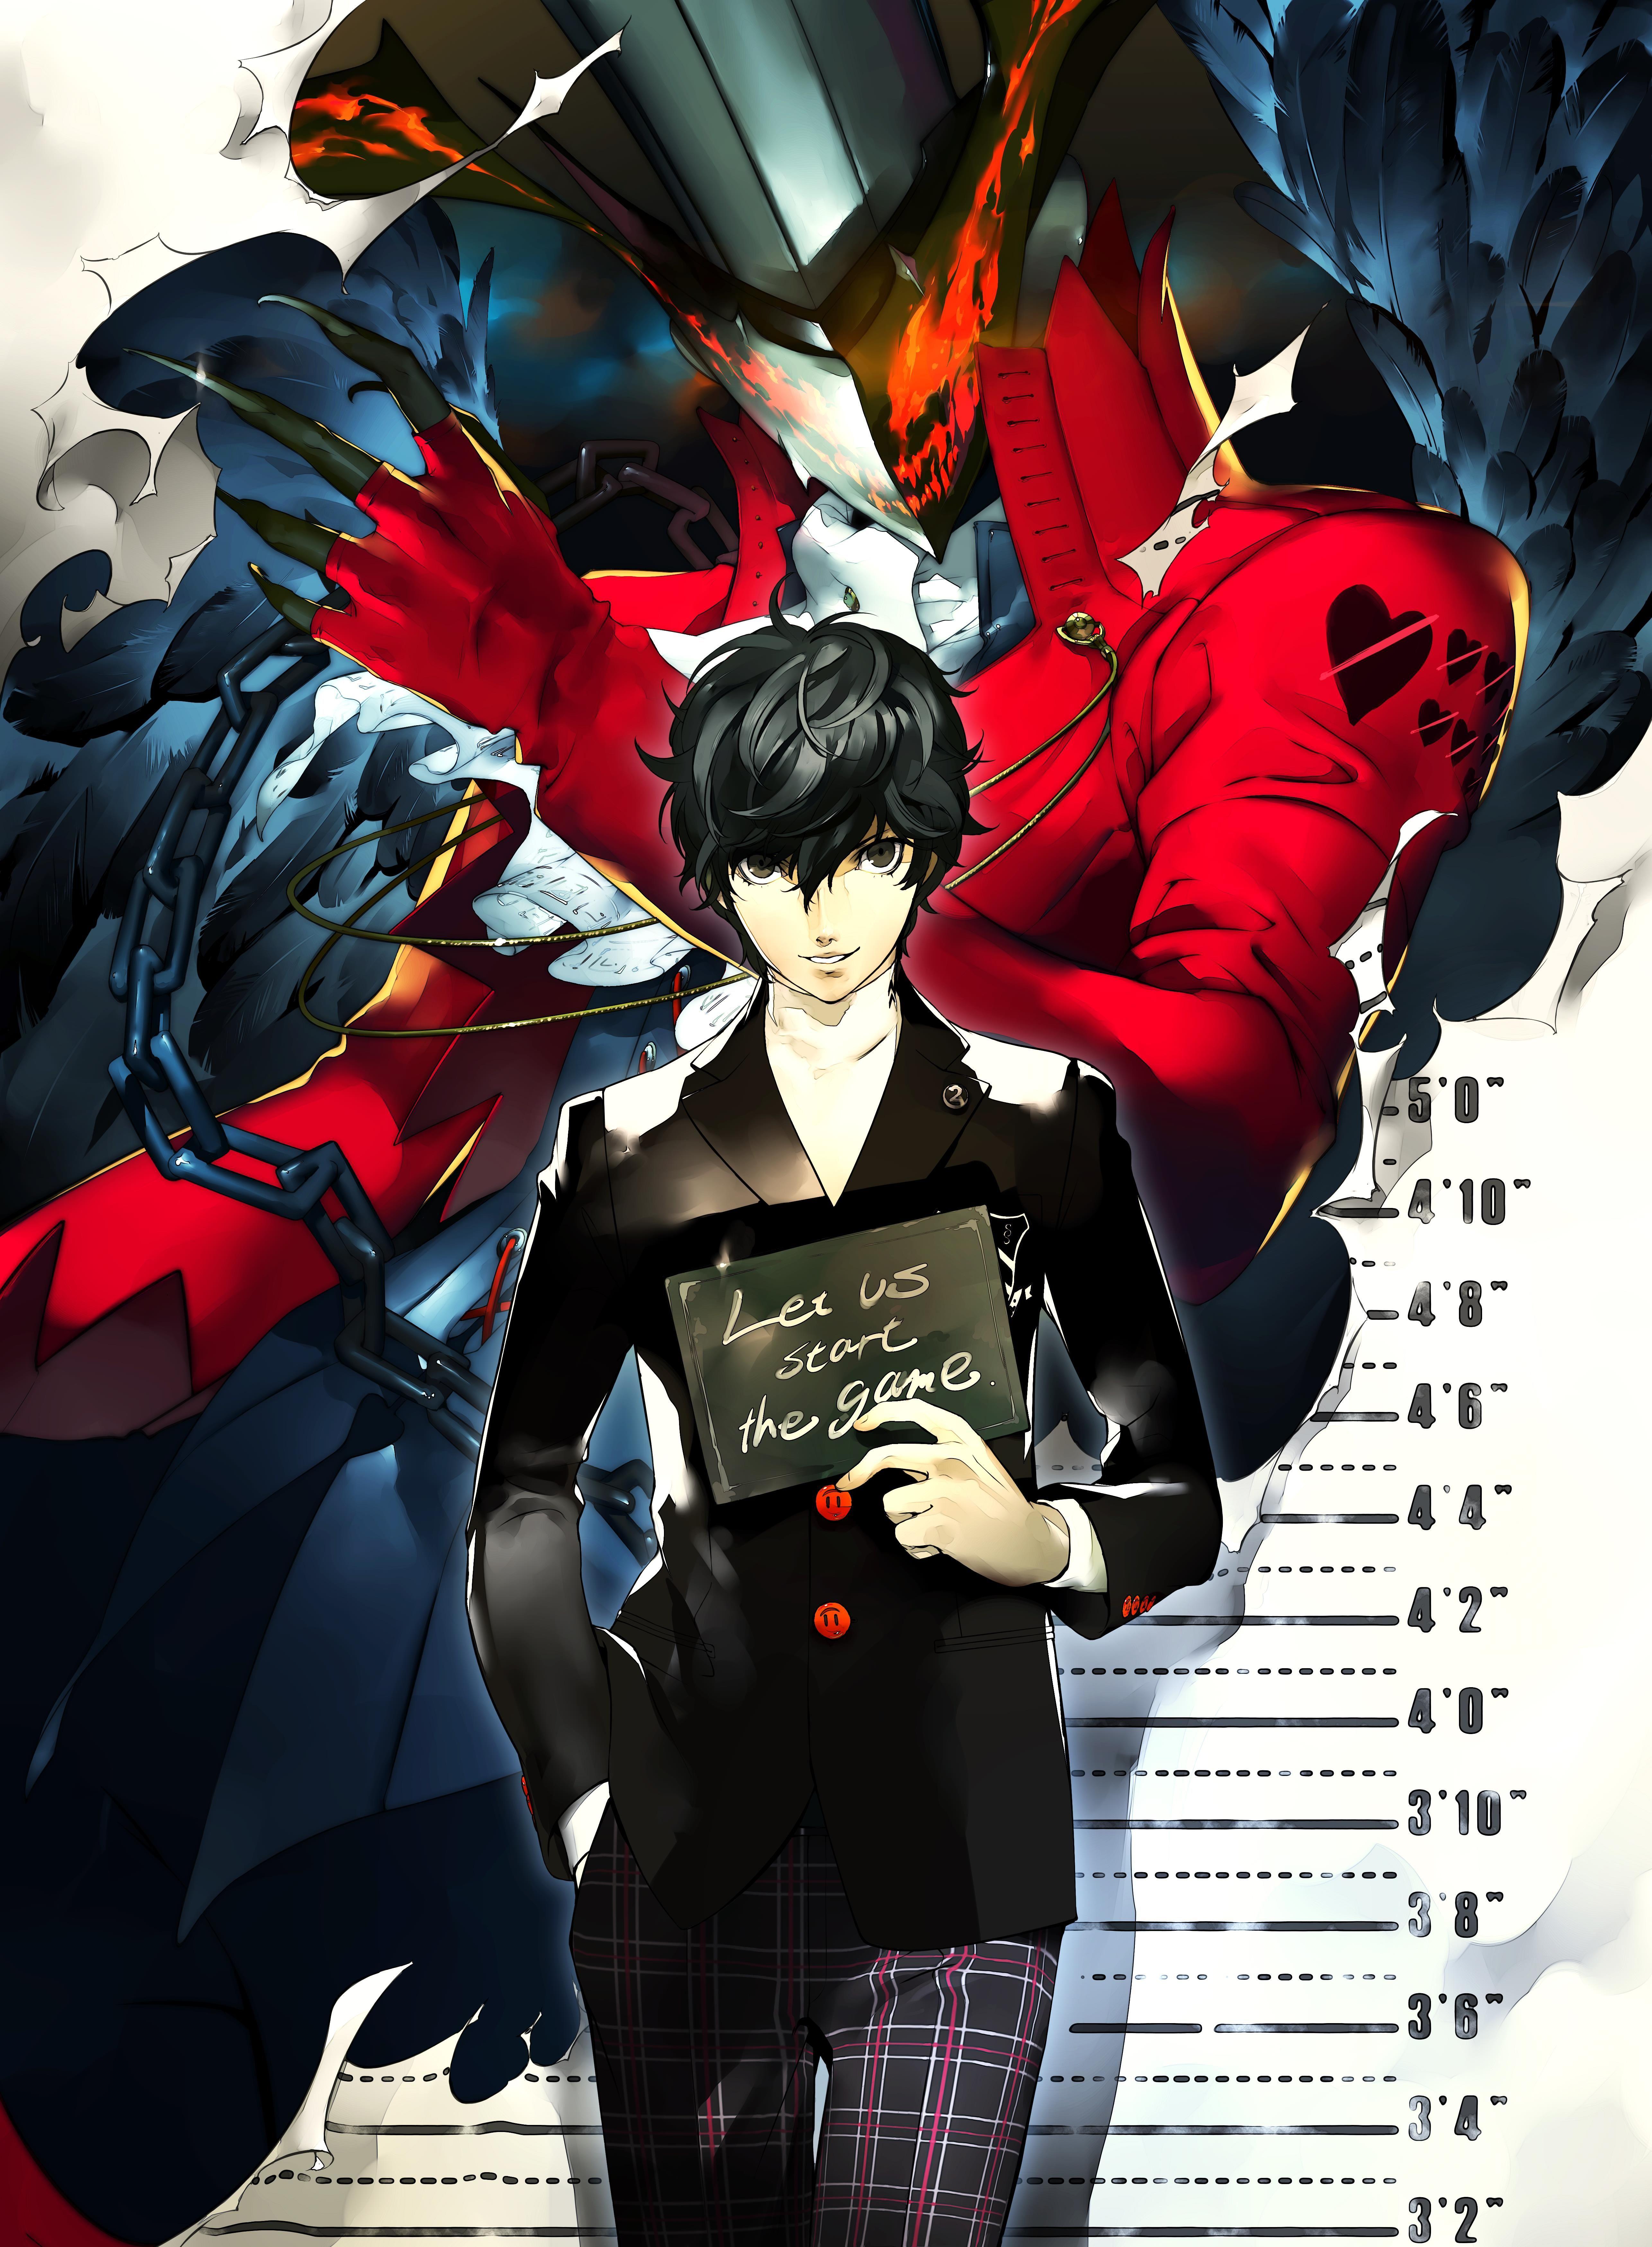 Persona 5 wallpapers for desktop download free Persona 5 pictures and  backgrounds for PC  moborg